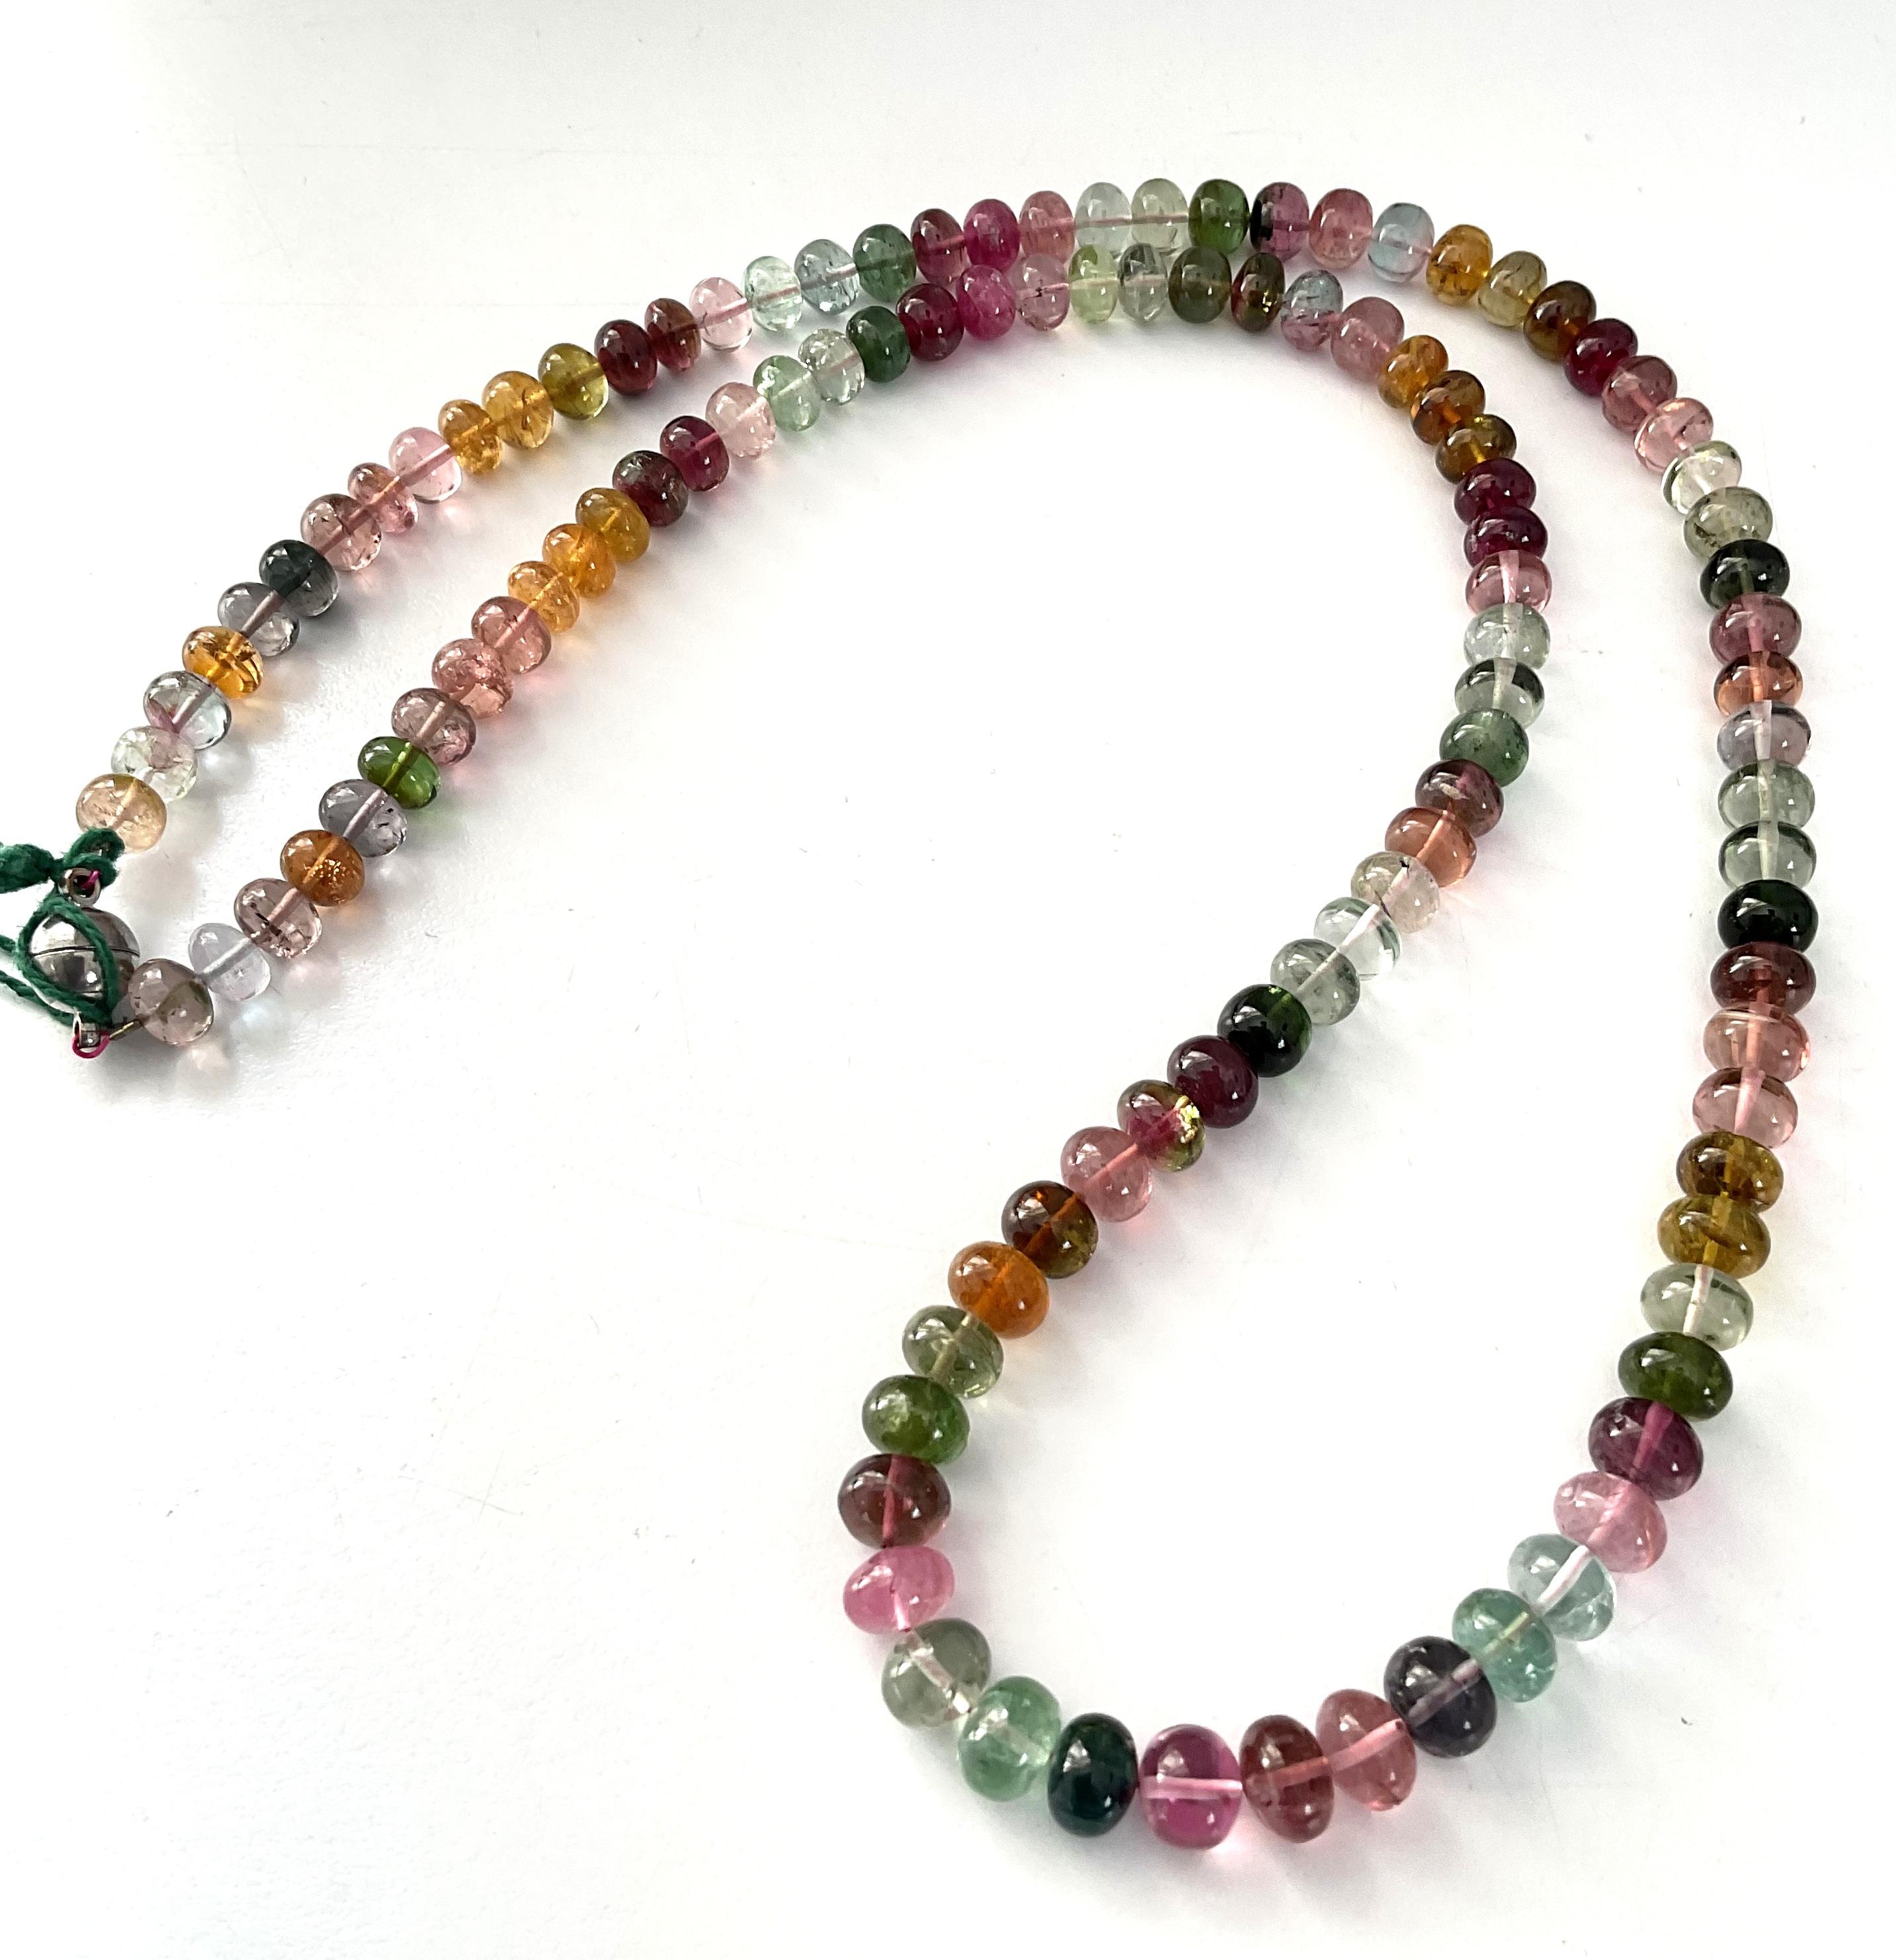 Women's or Men's 265.70 Carats Multi Tourmaline Beaded Necklace For Fine Jewelry Natural Gemstone For Sale